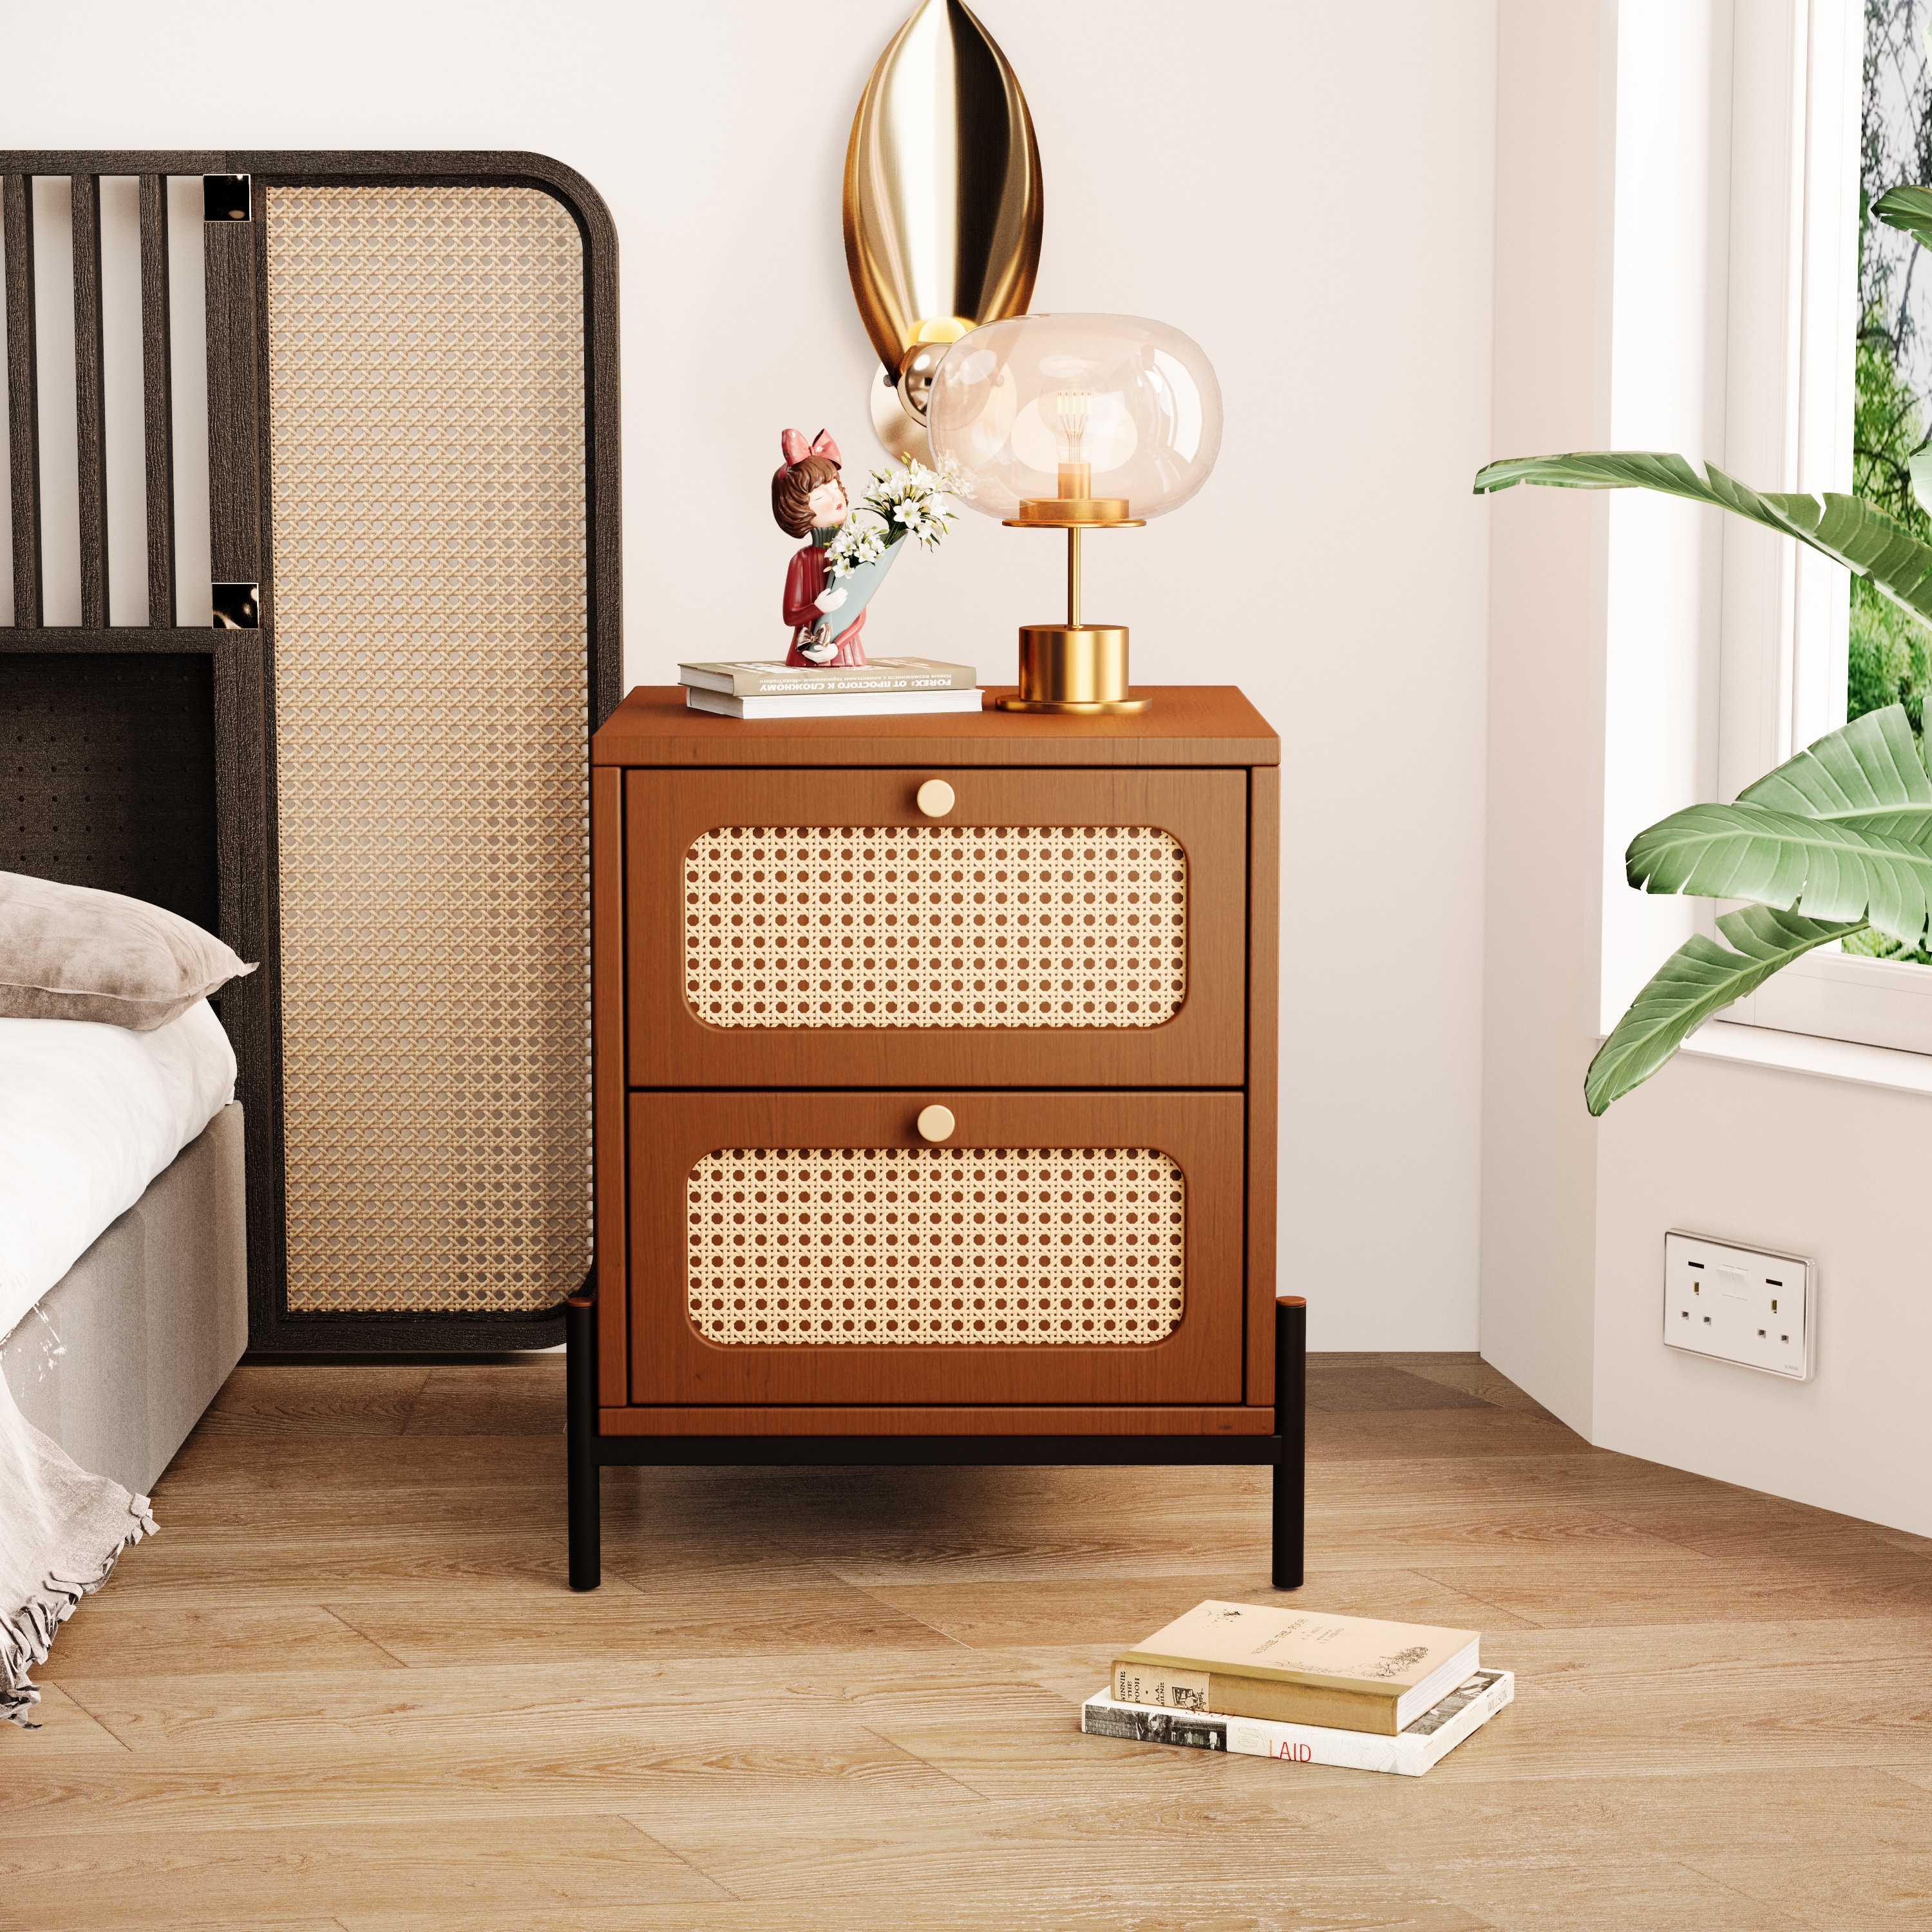 https://ak1.ostkcdn.com/images/products/is/images/direct/85abe8ed2ae85991ab59b012768f478a83dc4752/Rattan-Wood-Closet-2-Drawer-Nightstand.jpg